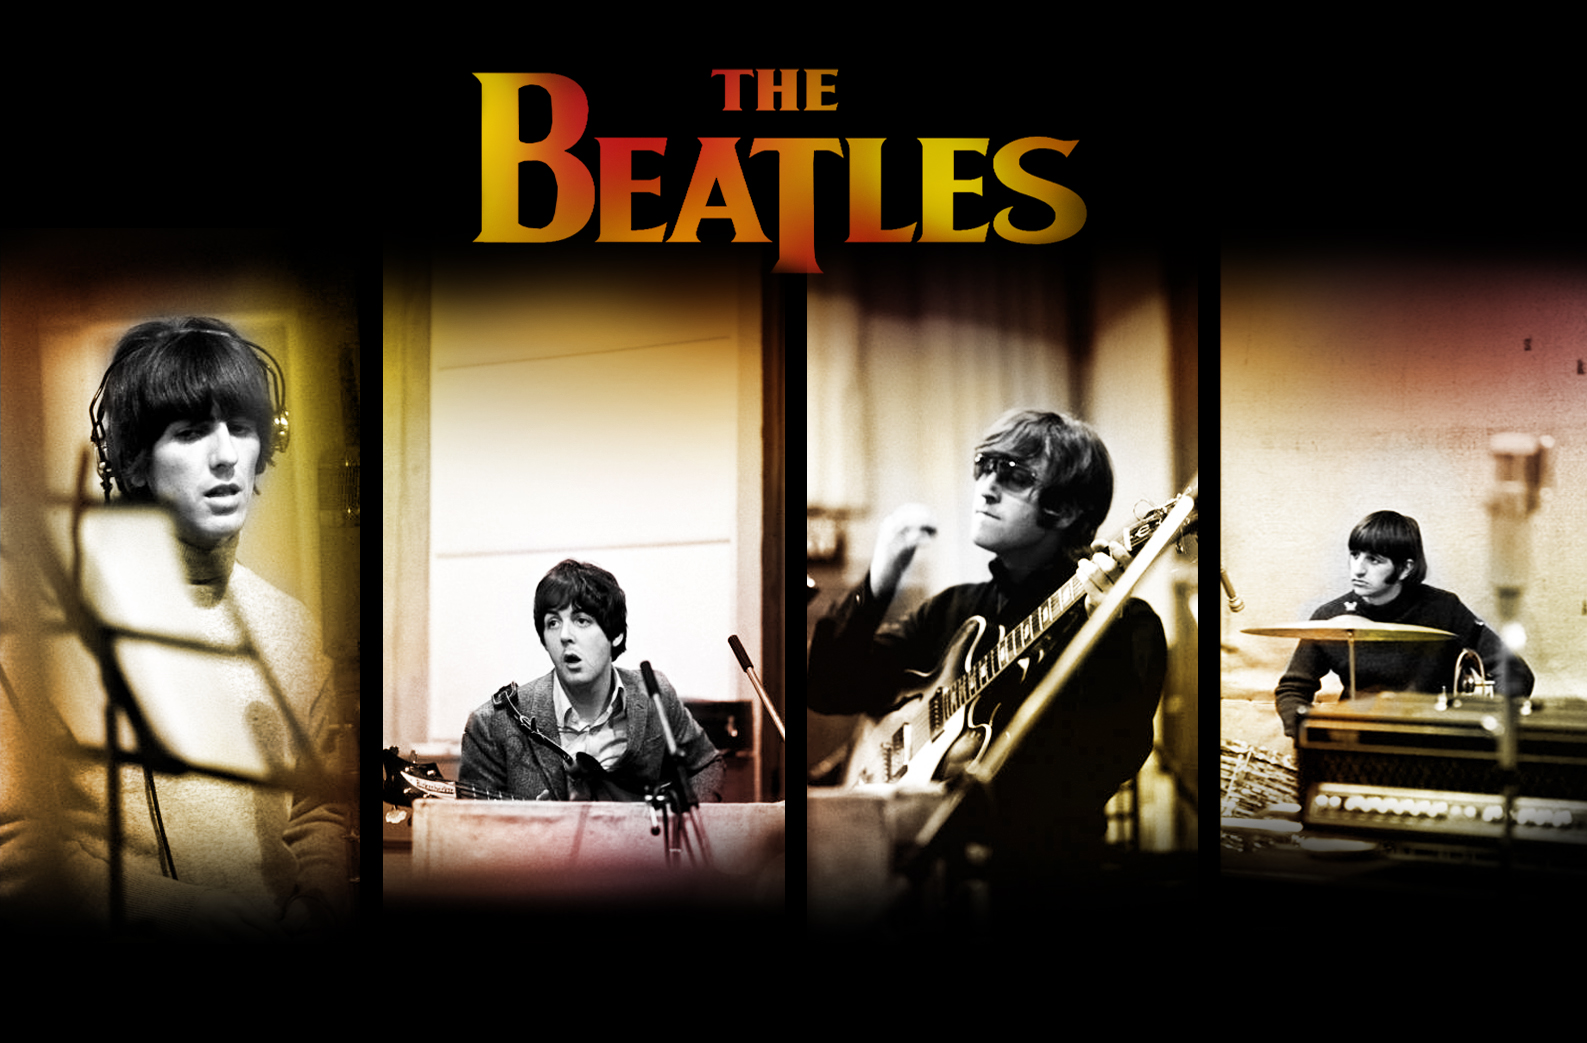 month The Beatles The Beatles wallpapers. our wallpaper of the month The Be...